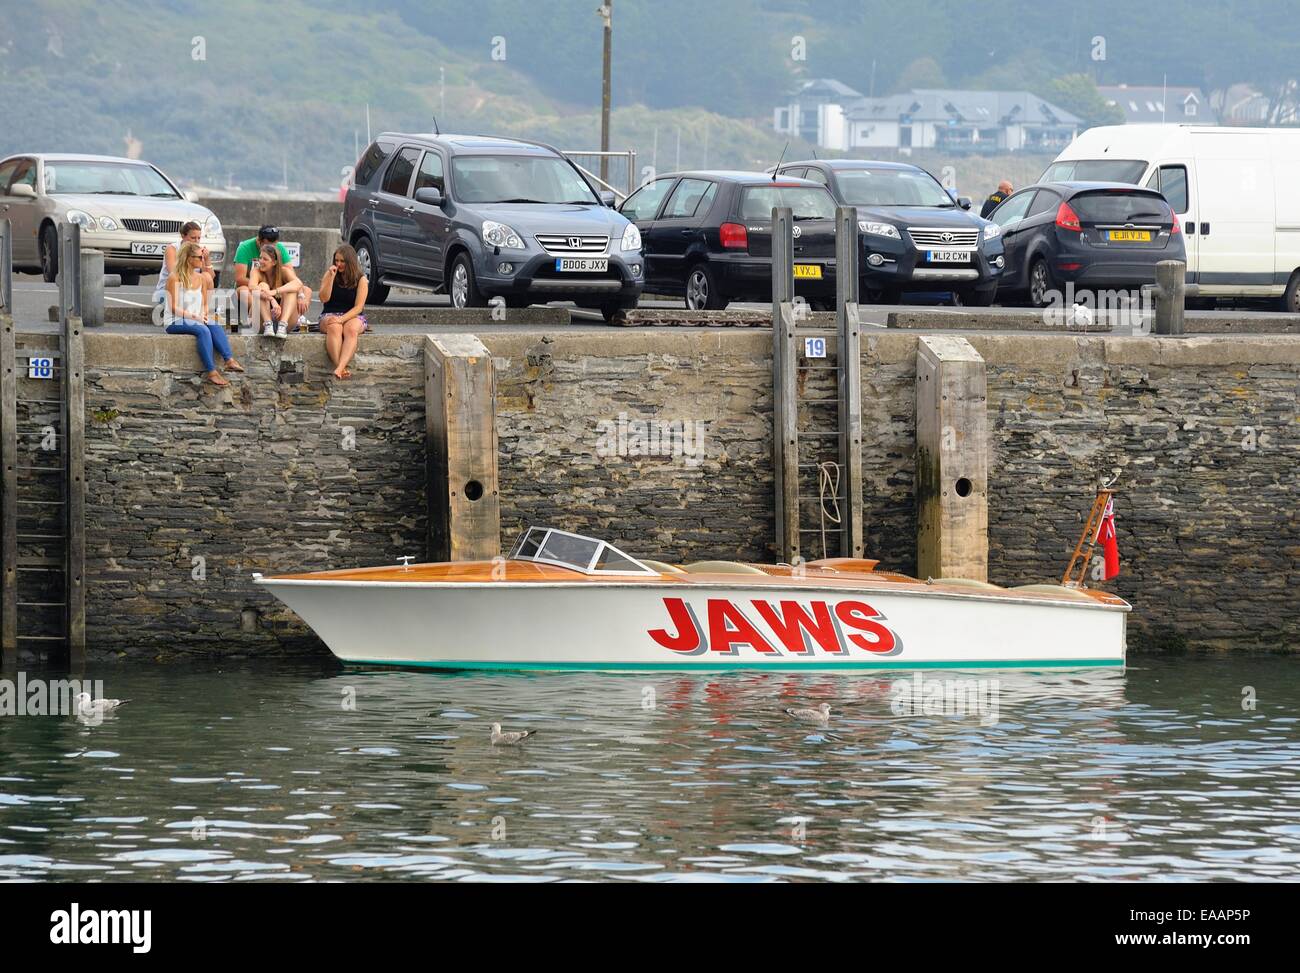 A group of teenagers sitting on the harbour wall next to a speedboat called Jaws.Padstow, Cornwall ,England ,uk Stock Photo